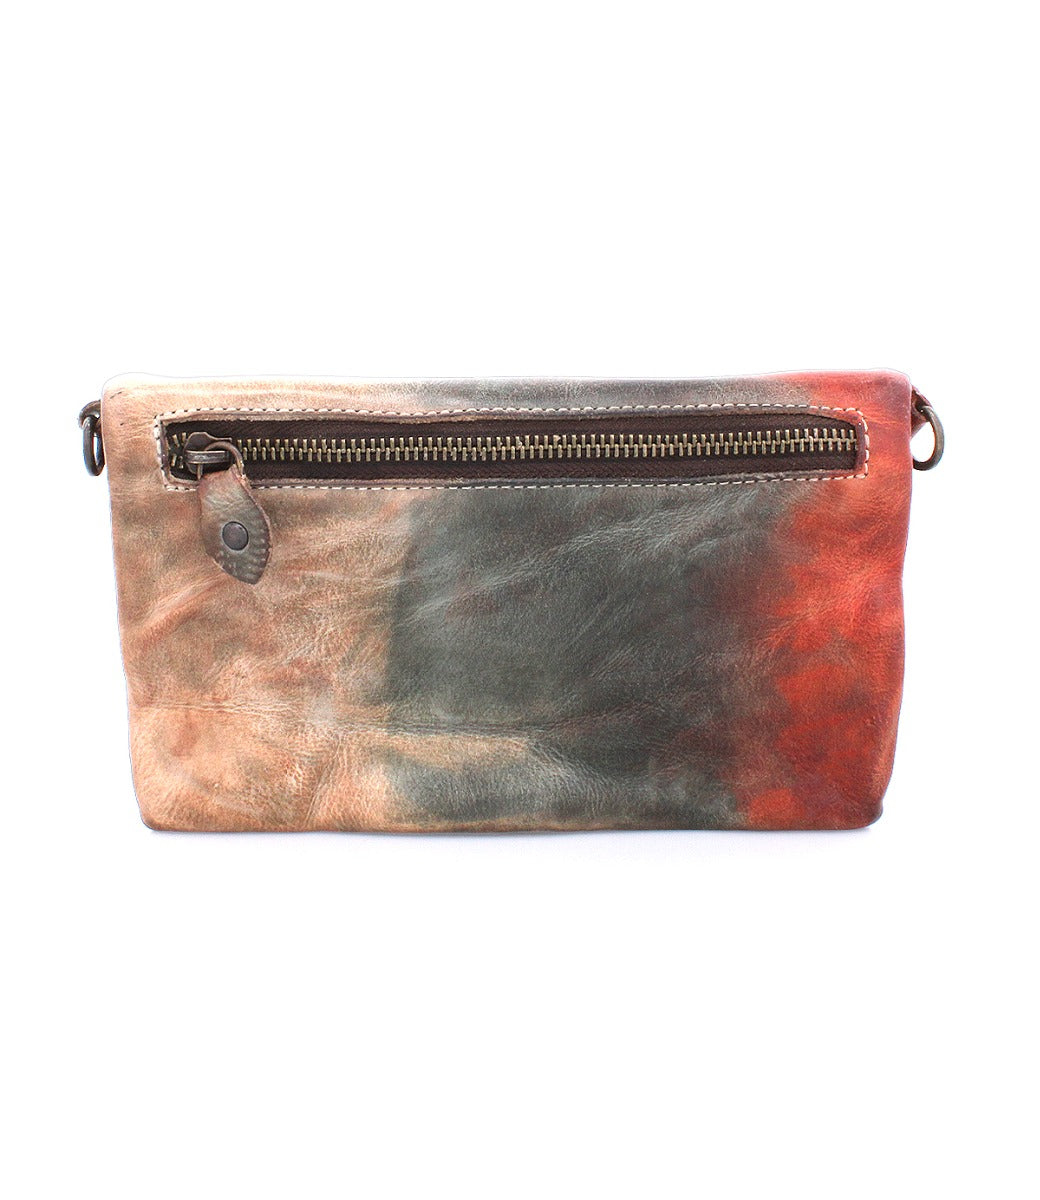 A Cadence multi-colored pure leather clutch bag by Bed Stu.